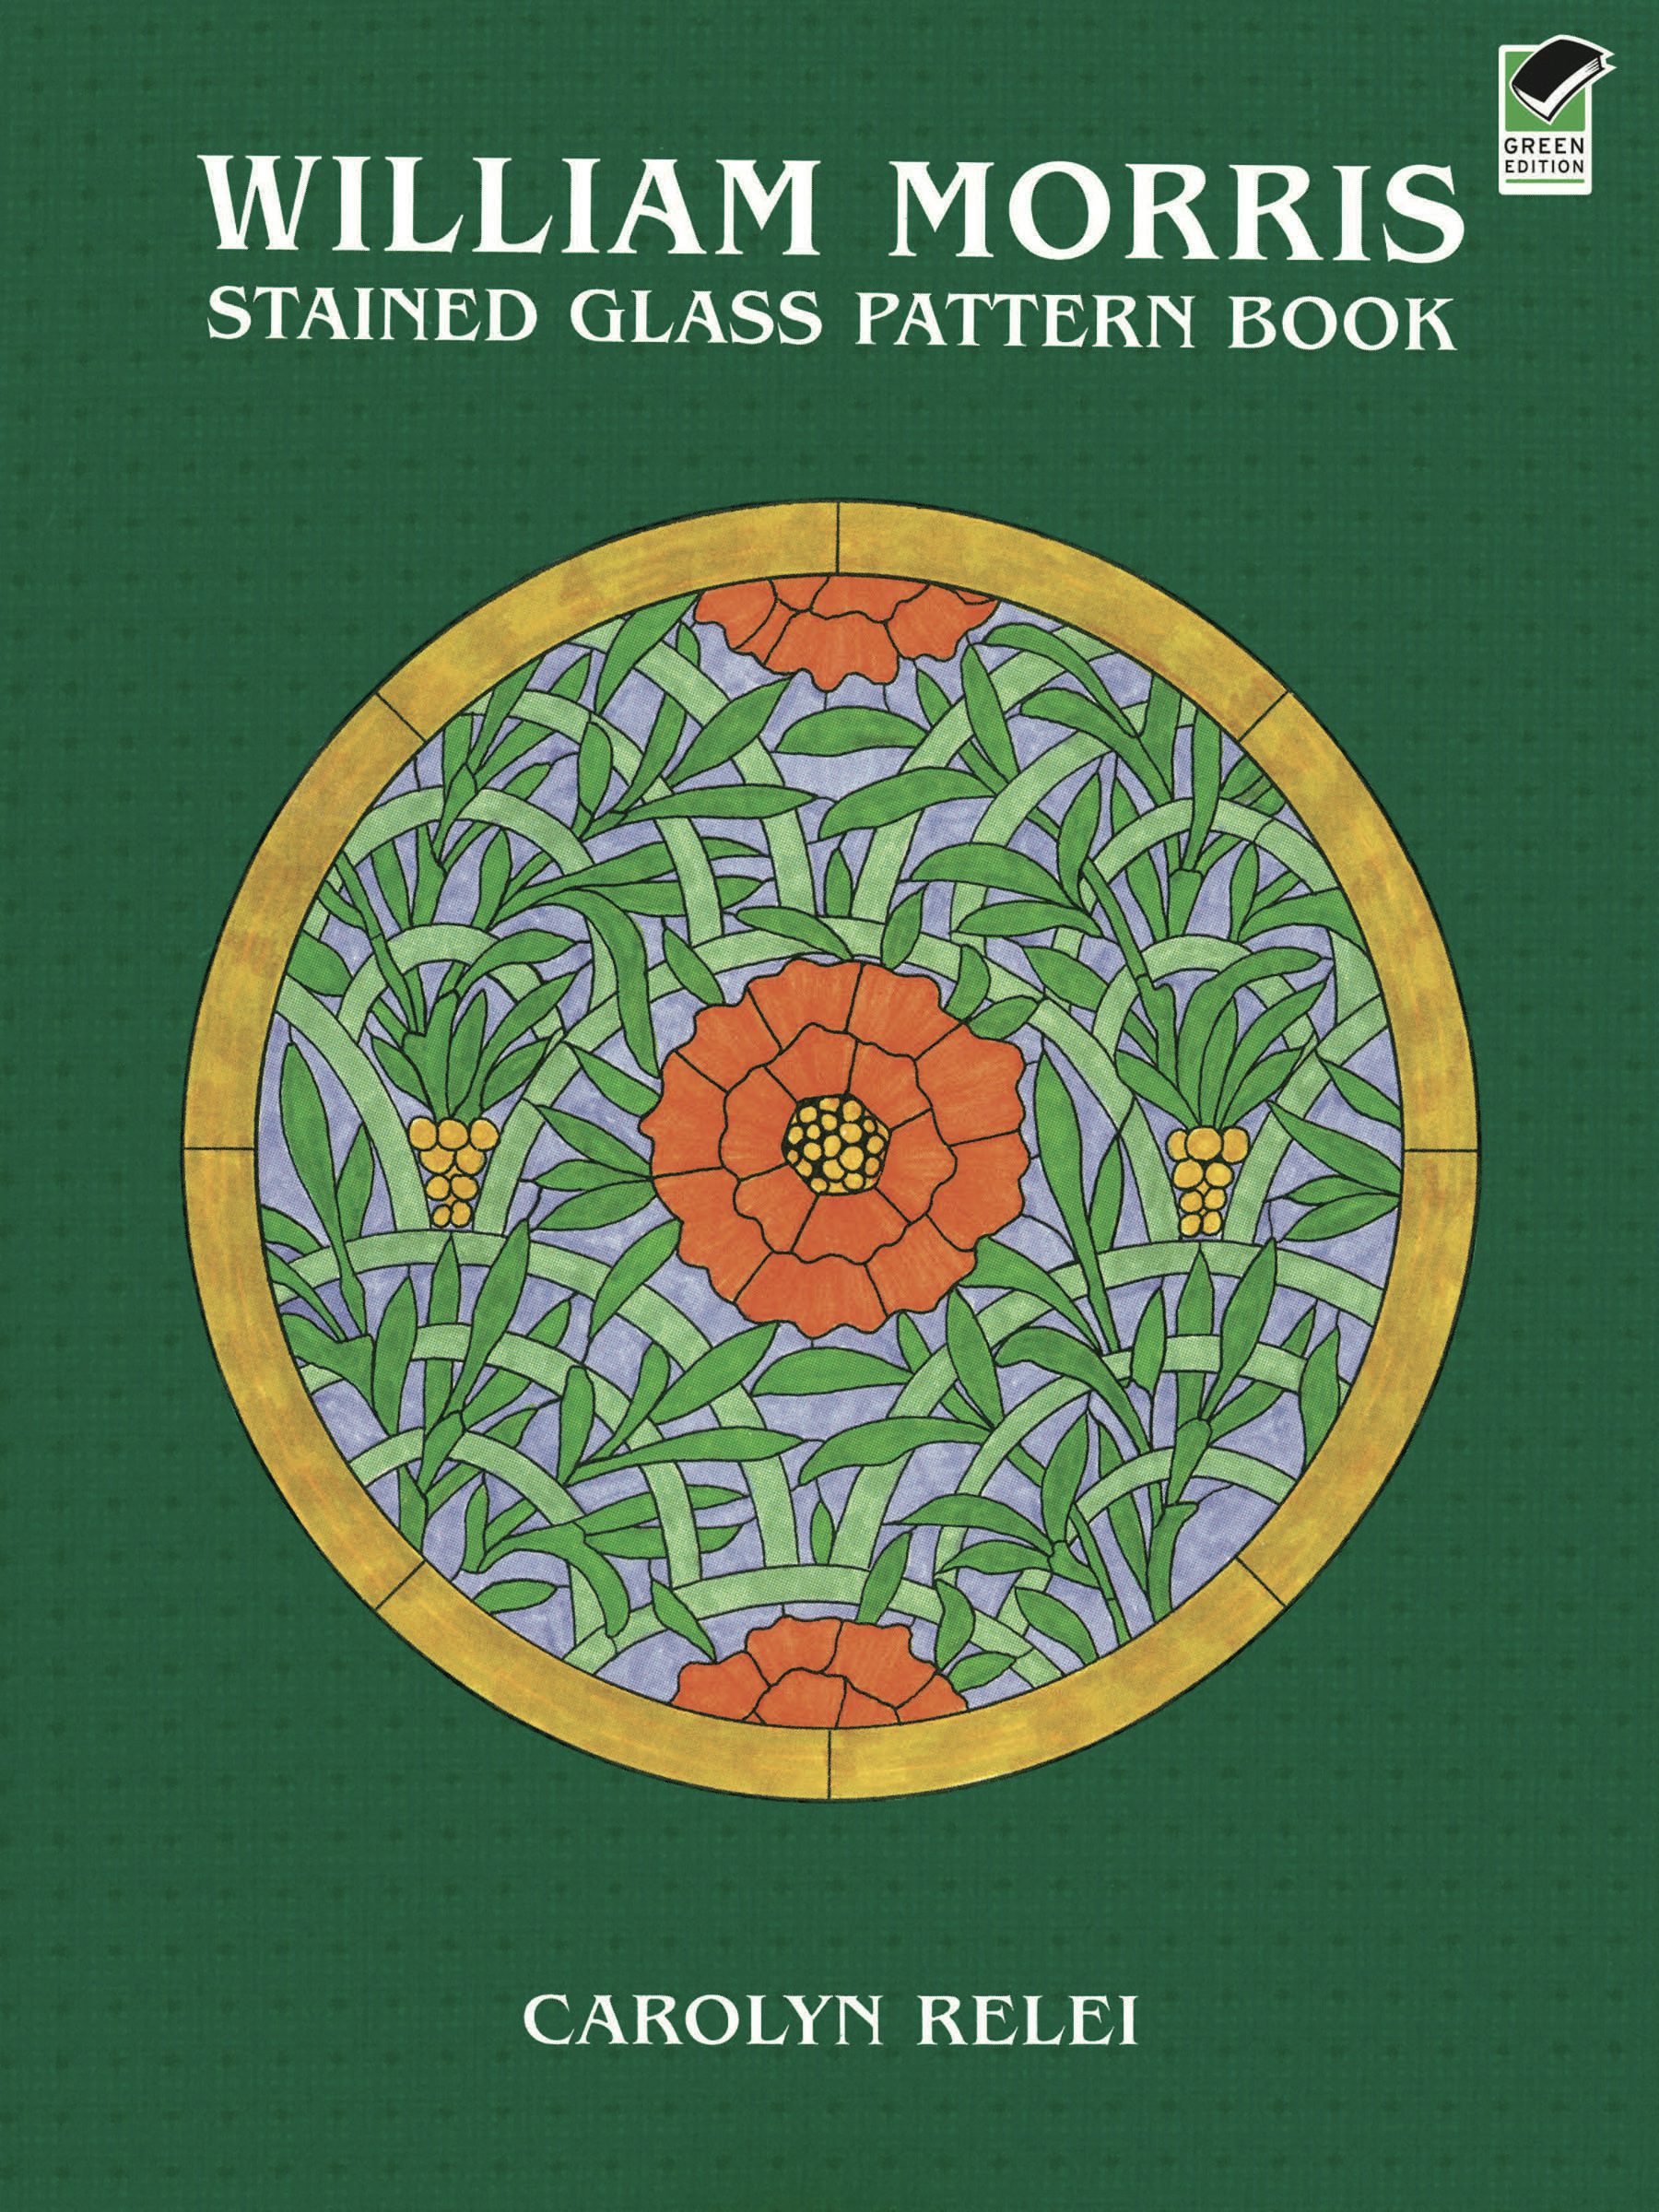 William Morris Stained Glass Pattern Book – Dover Publications